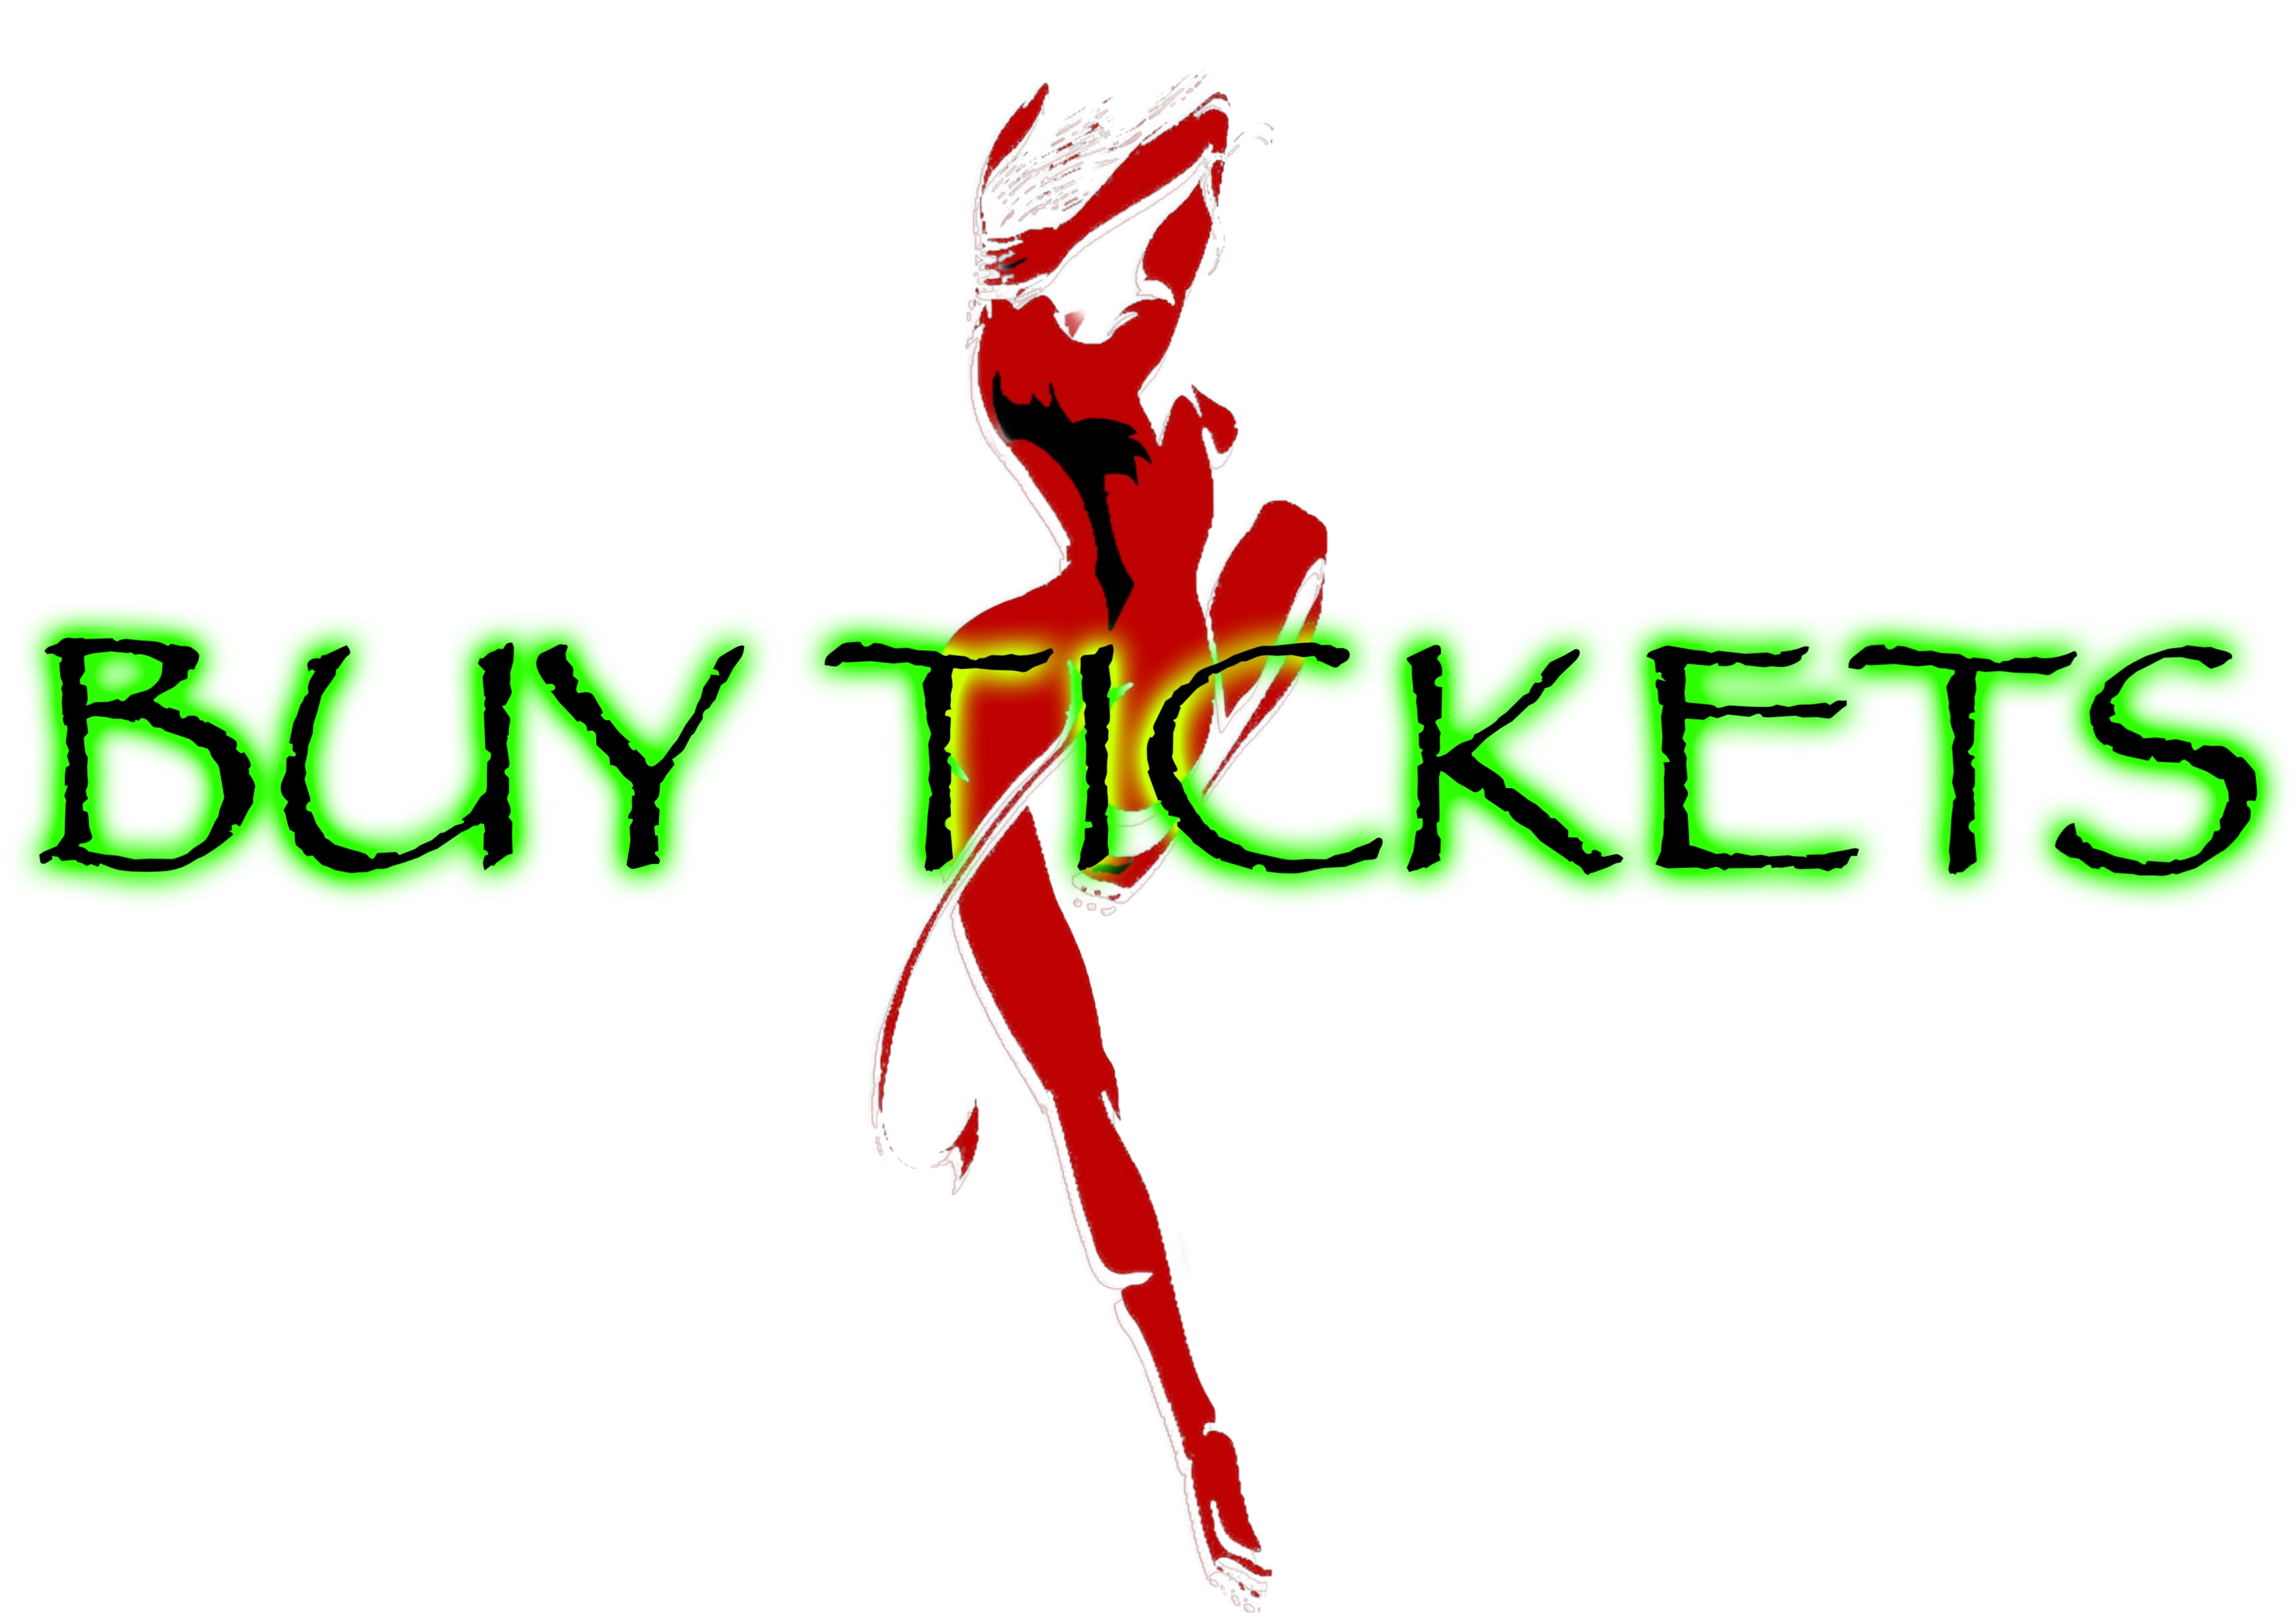 620-buy-tickets-button-2.png